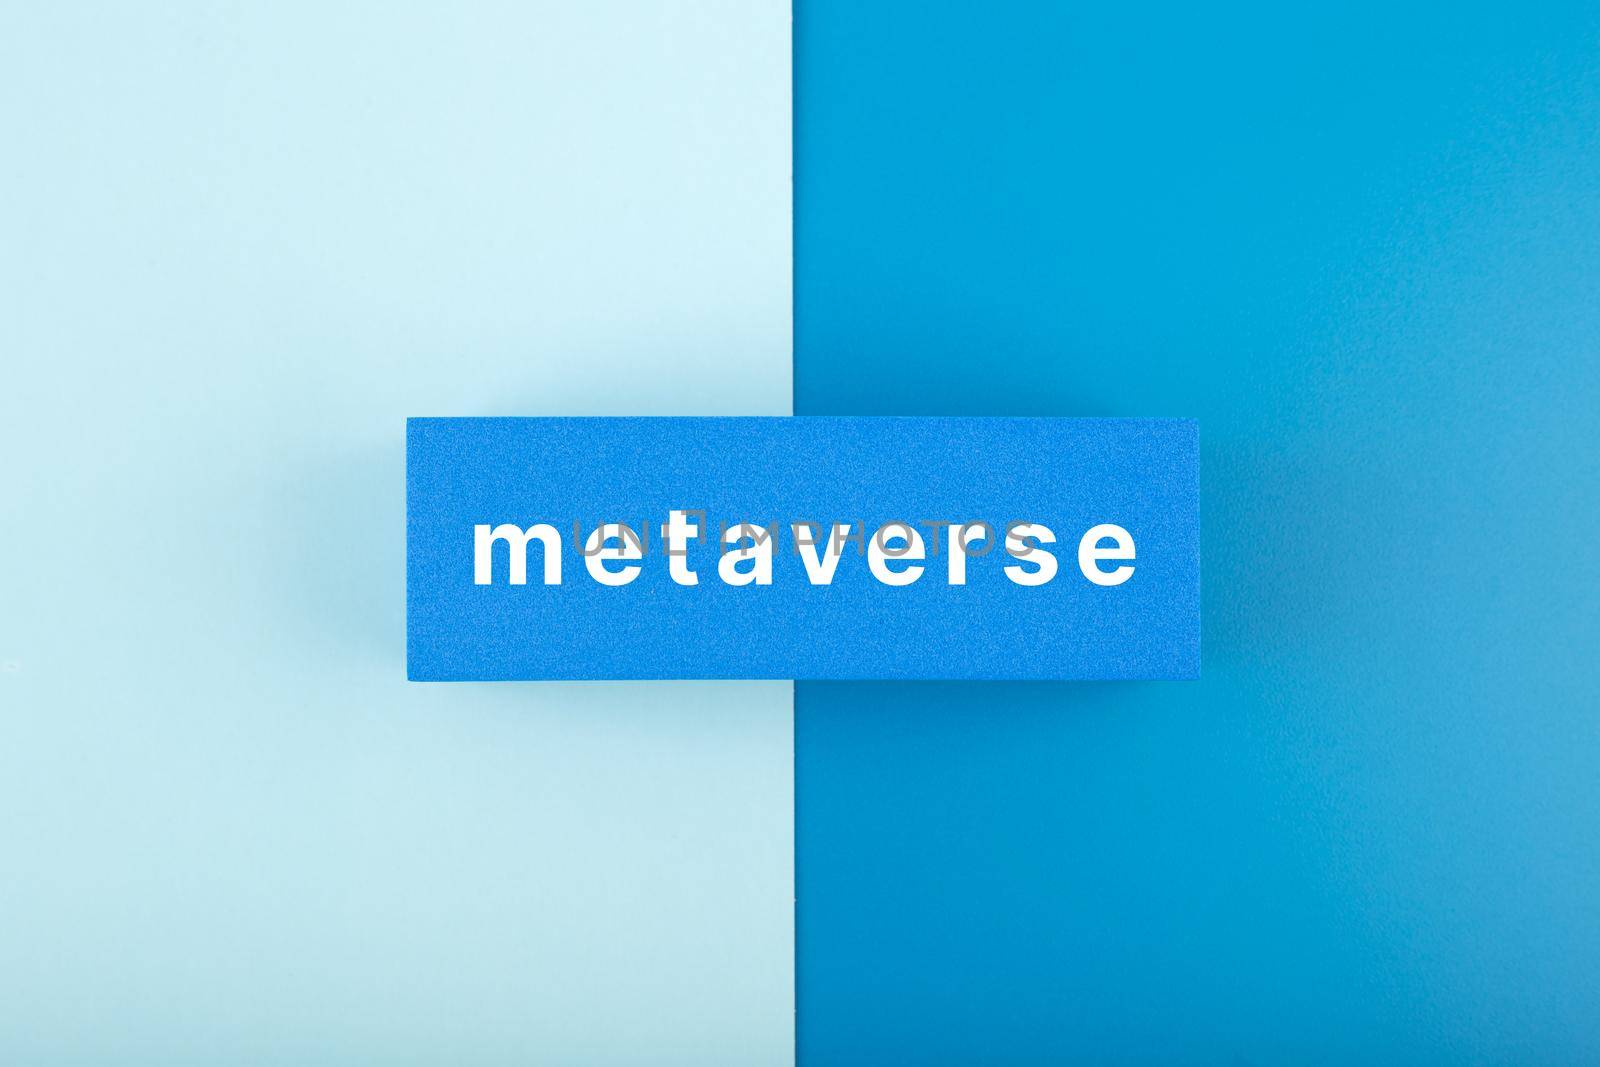 Metaverse modern minimal concept in blue colors. Written metaverse single word on blue rectangle against blue background. Future technologies.